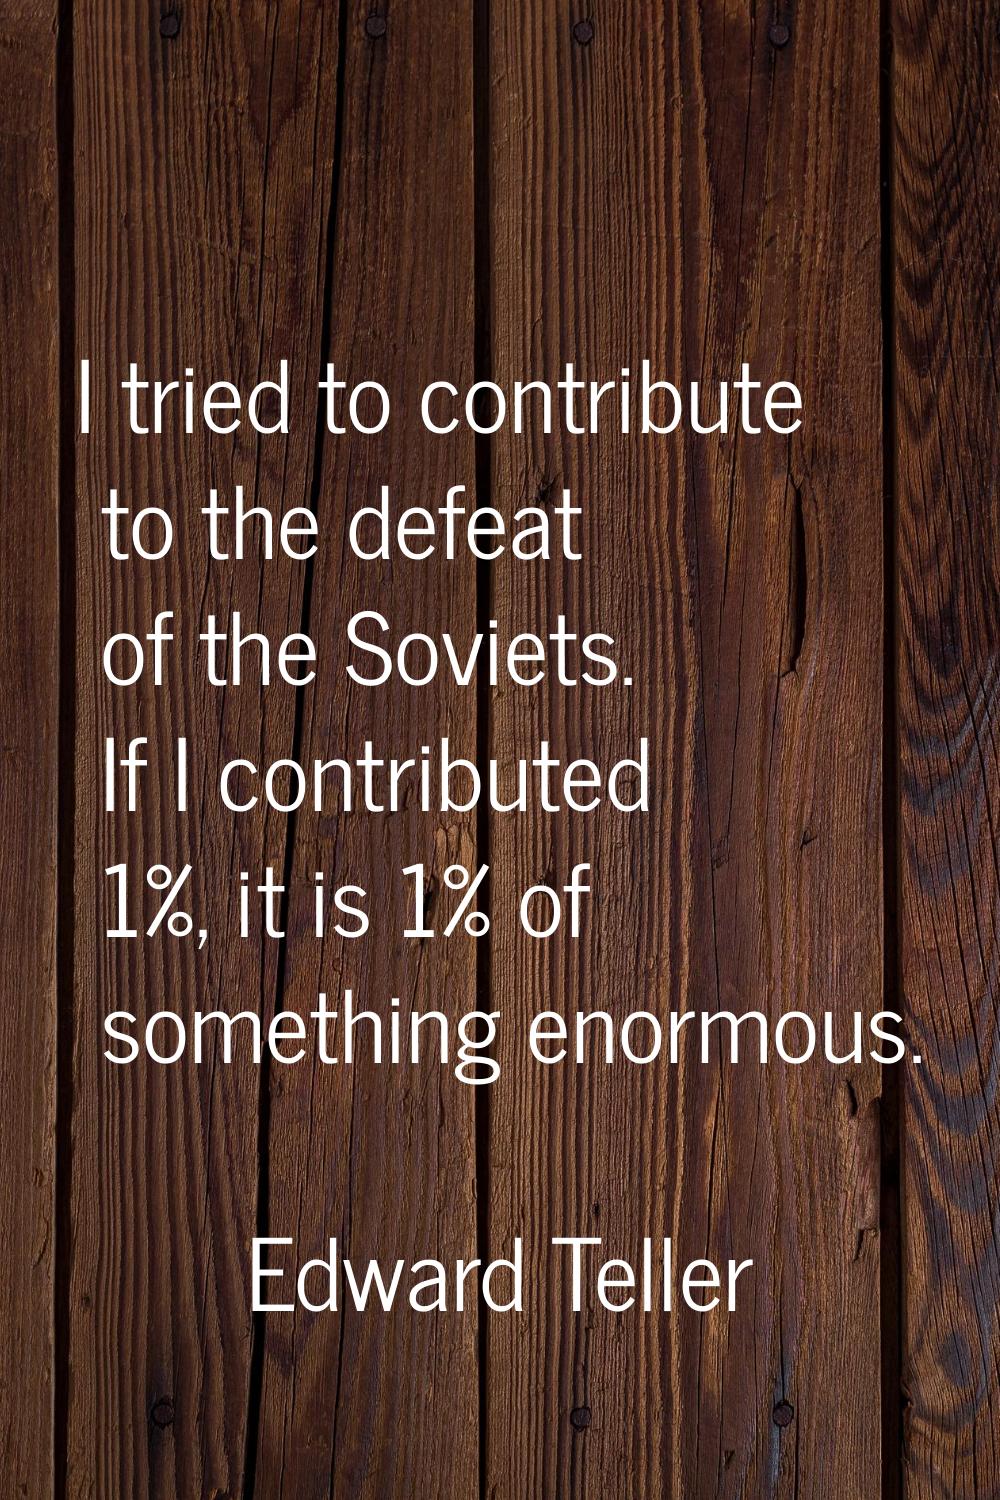 I tried to contribute to the defeat of the Soviets. If I contributed 1%, it is 1% of something enor